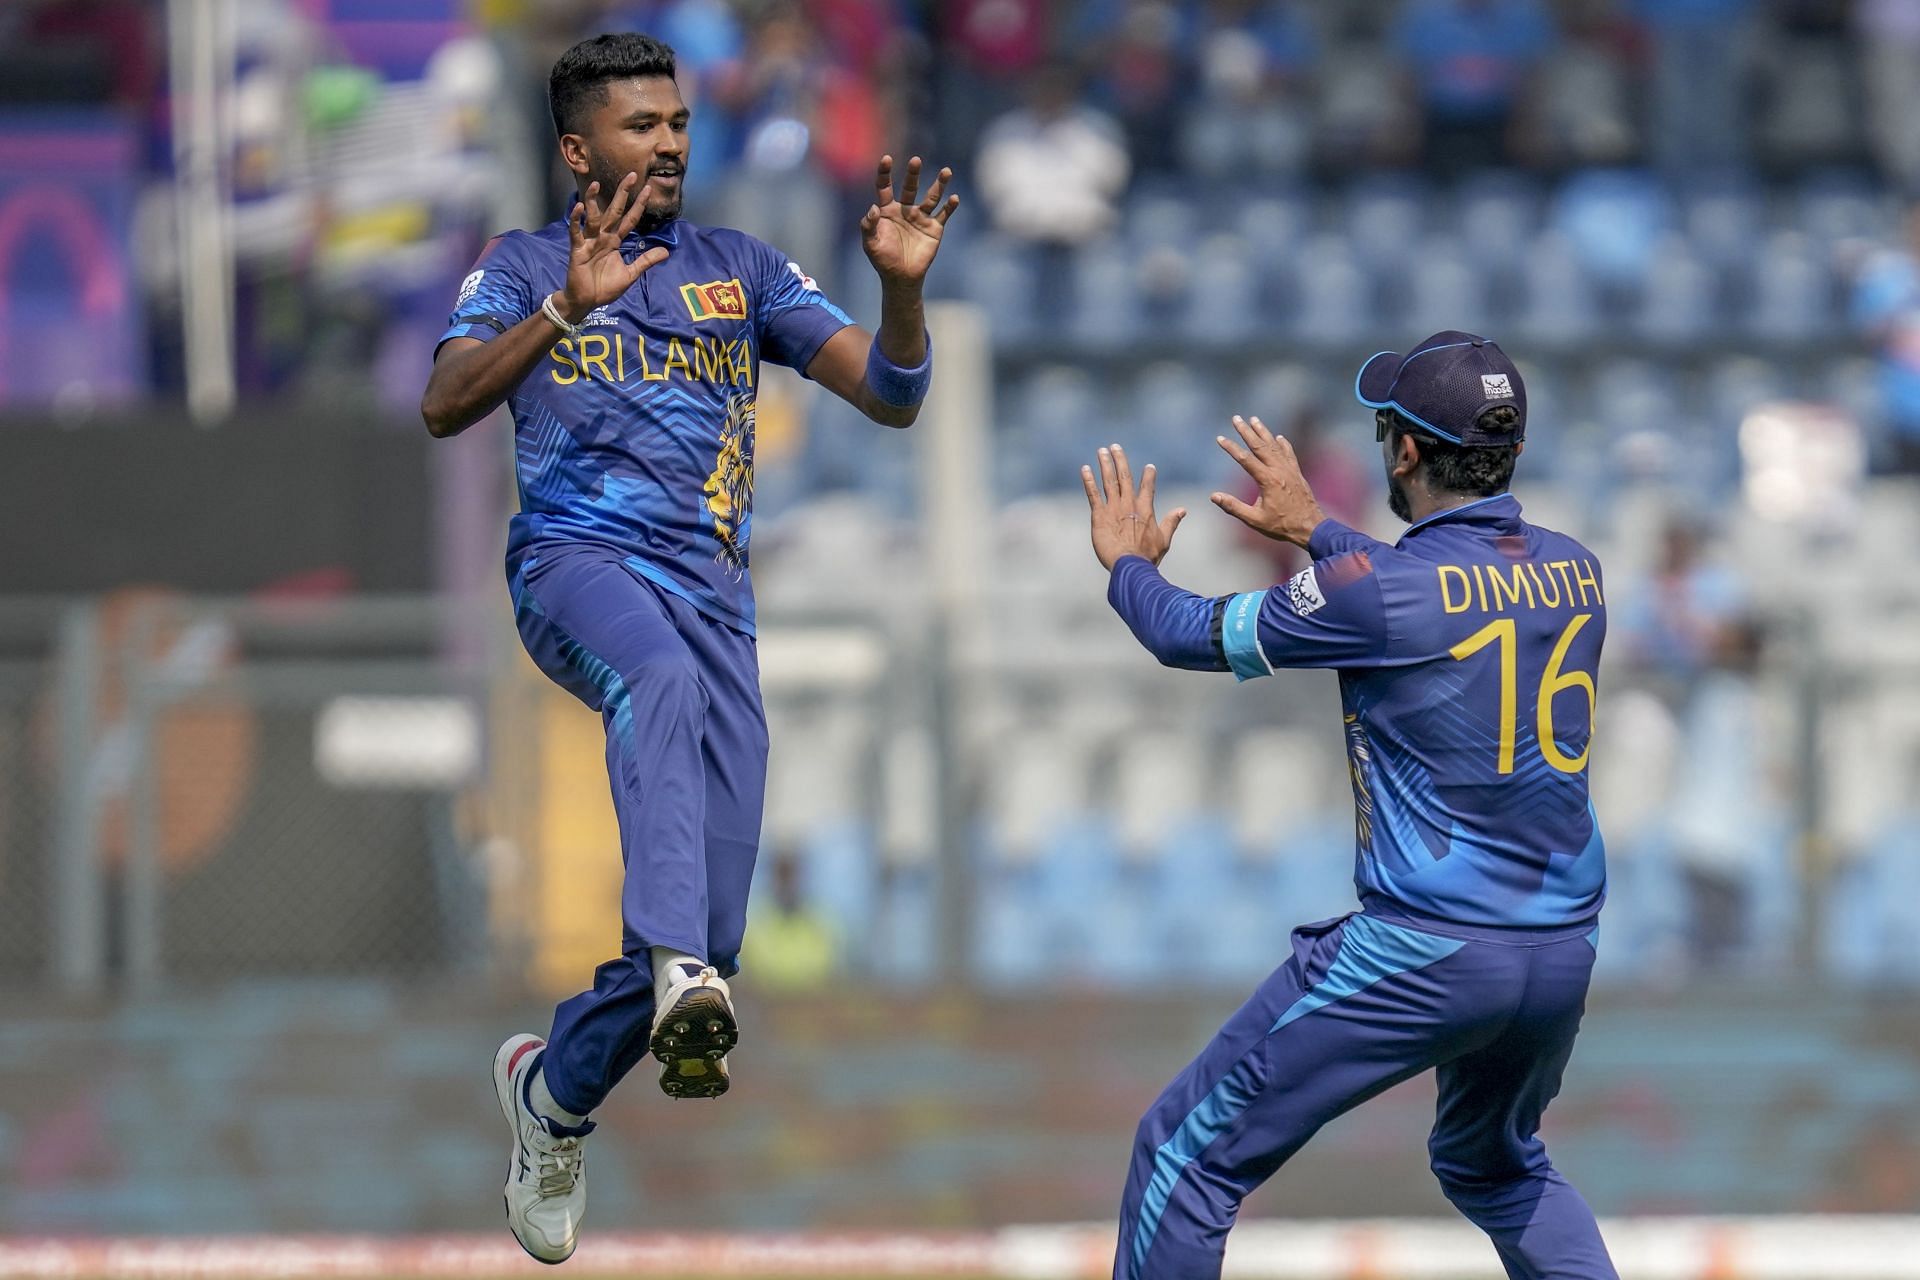 Dilshan Madushanka picked up a five-wicket haul against India. [P/C: AP]